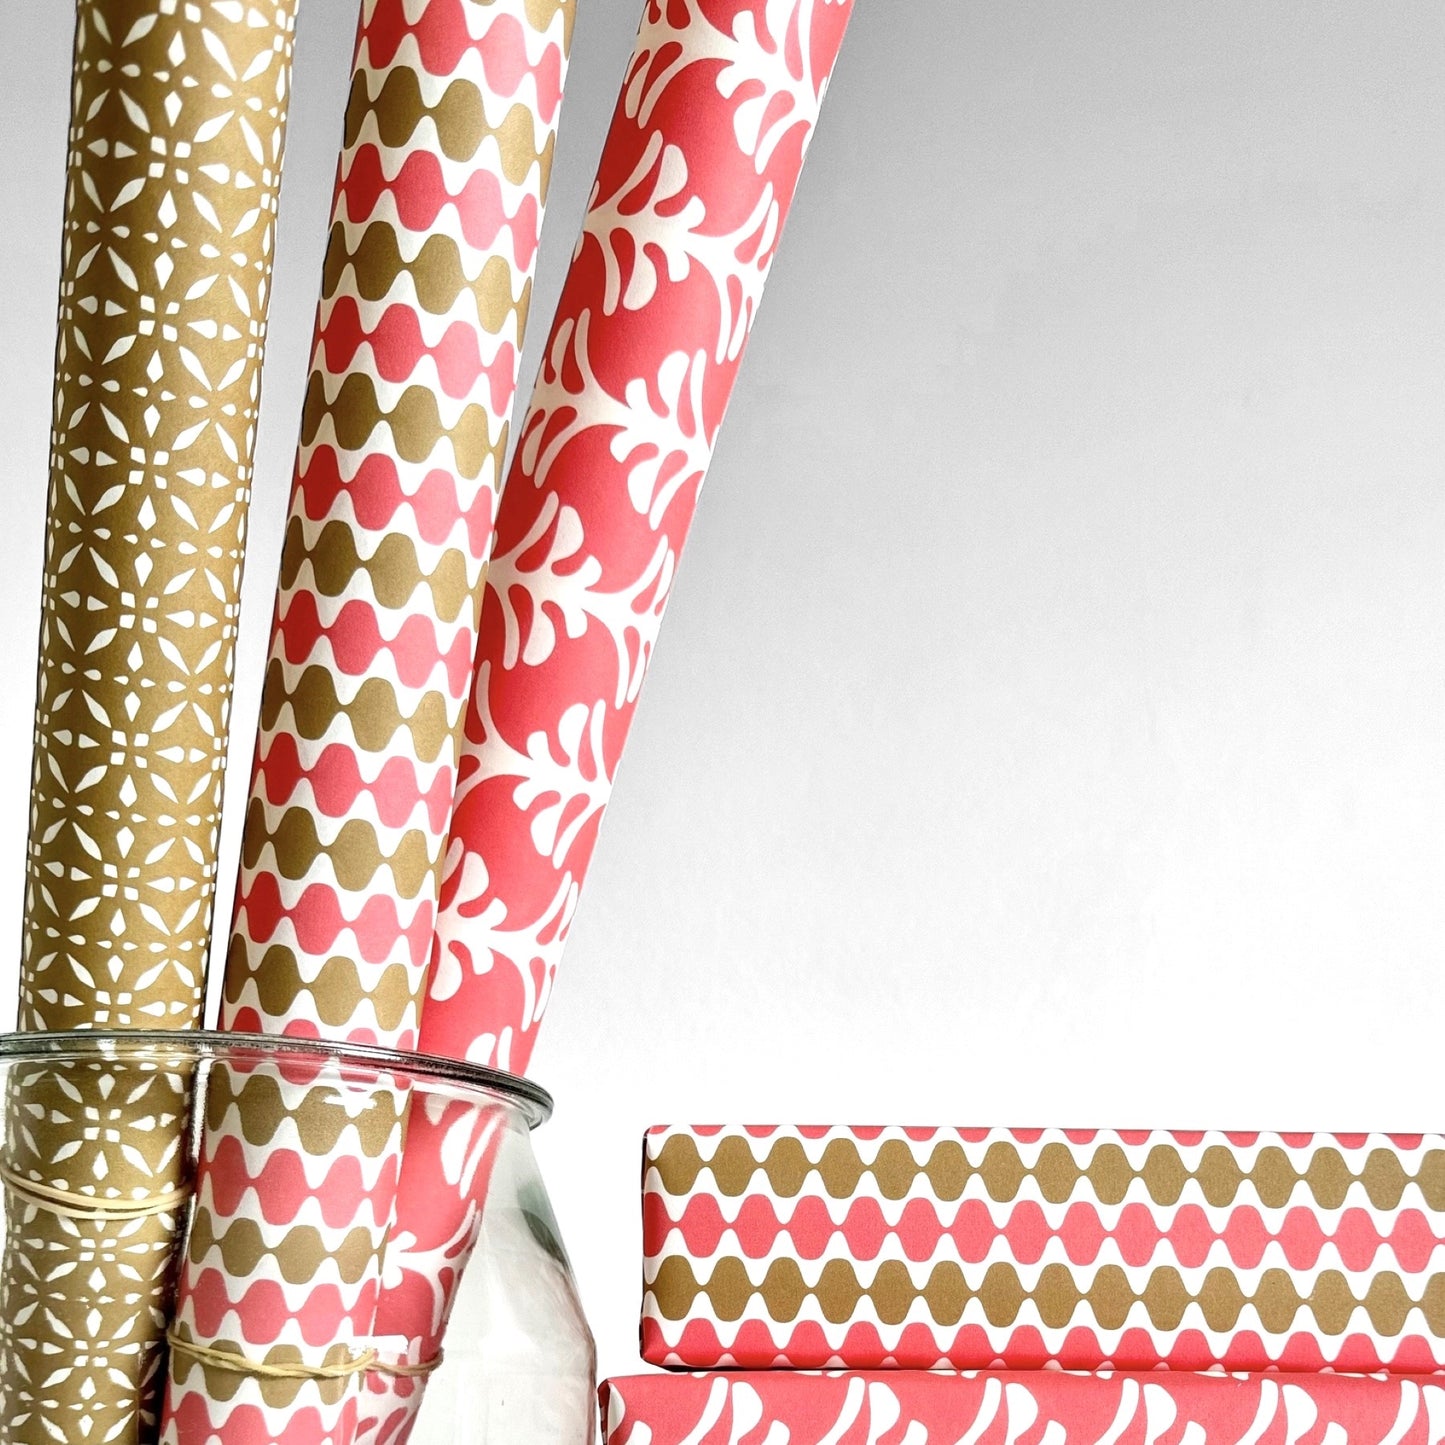 wrapping paper by Otto Editions with a cut-out wavy design in white on a coral and gold background. Pictured wrapped as a present with other designs